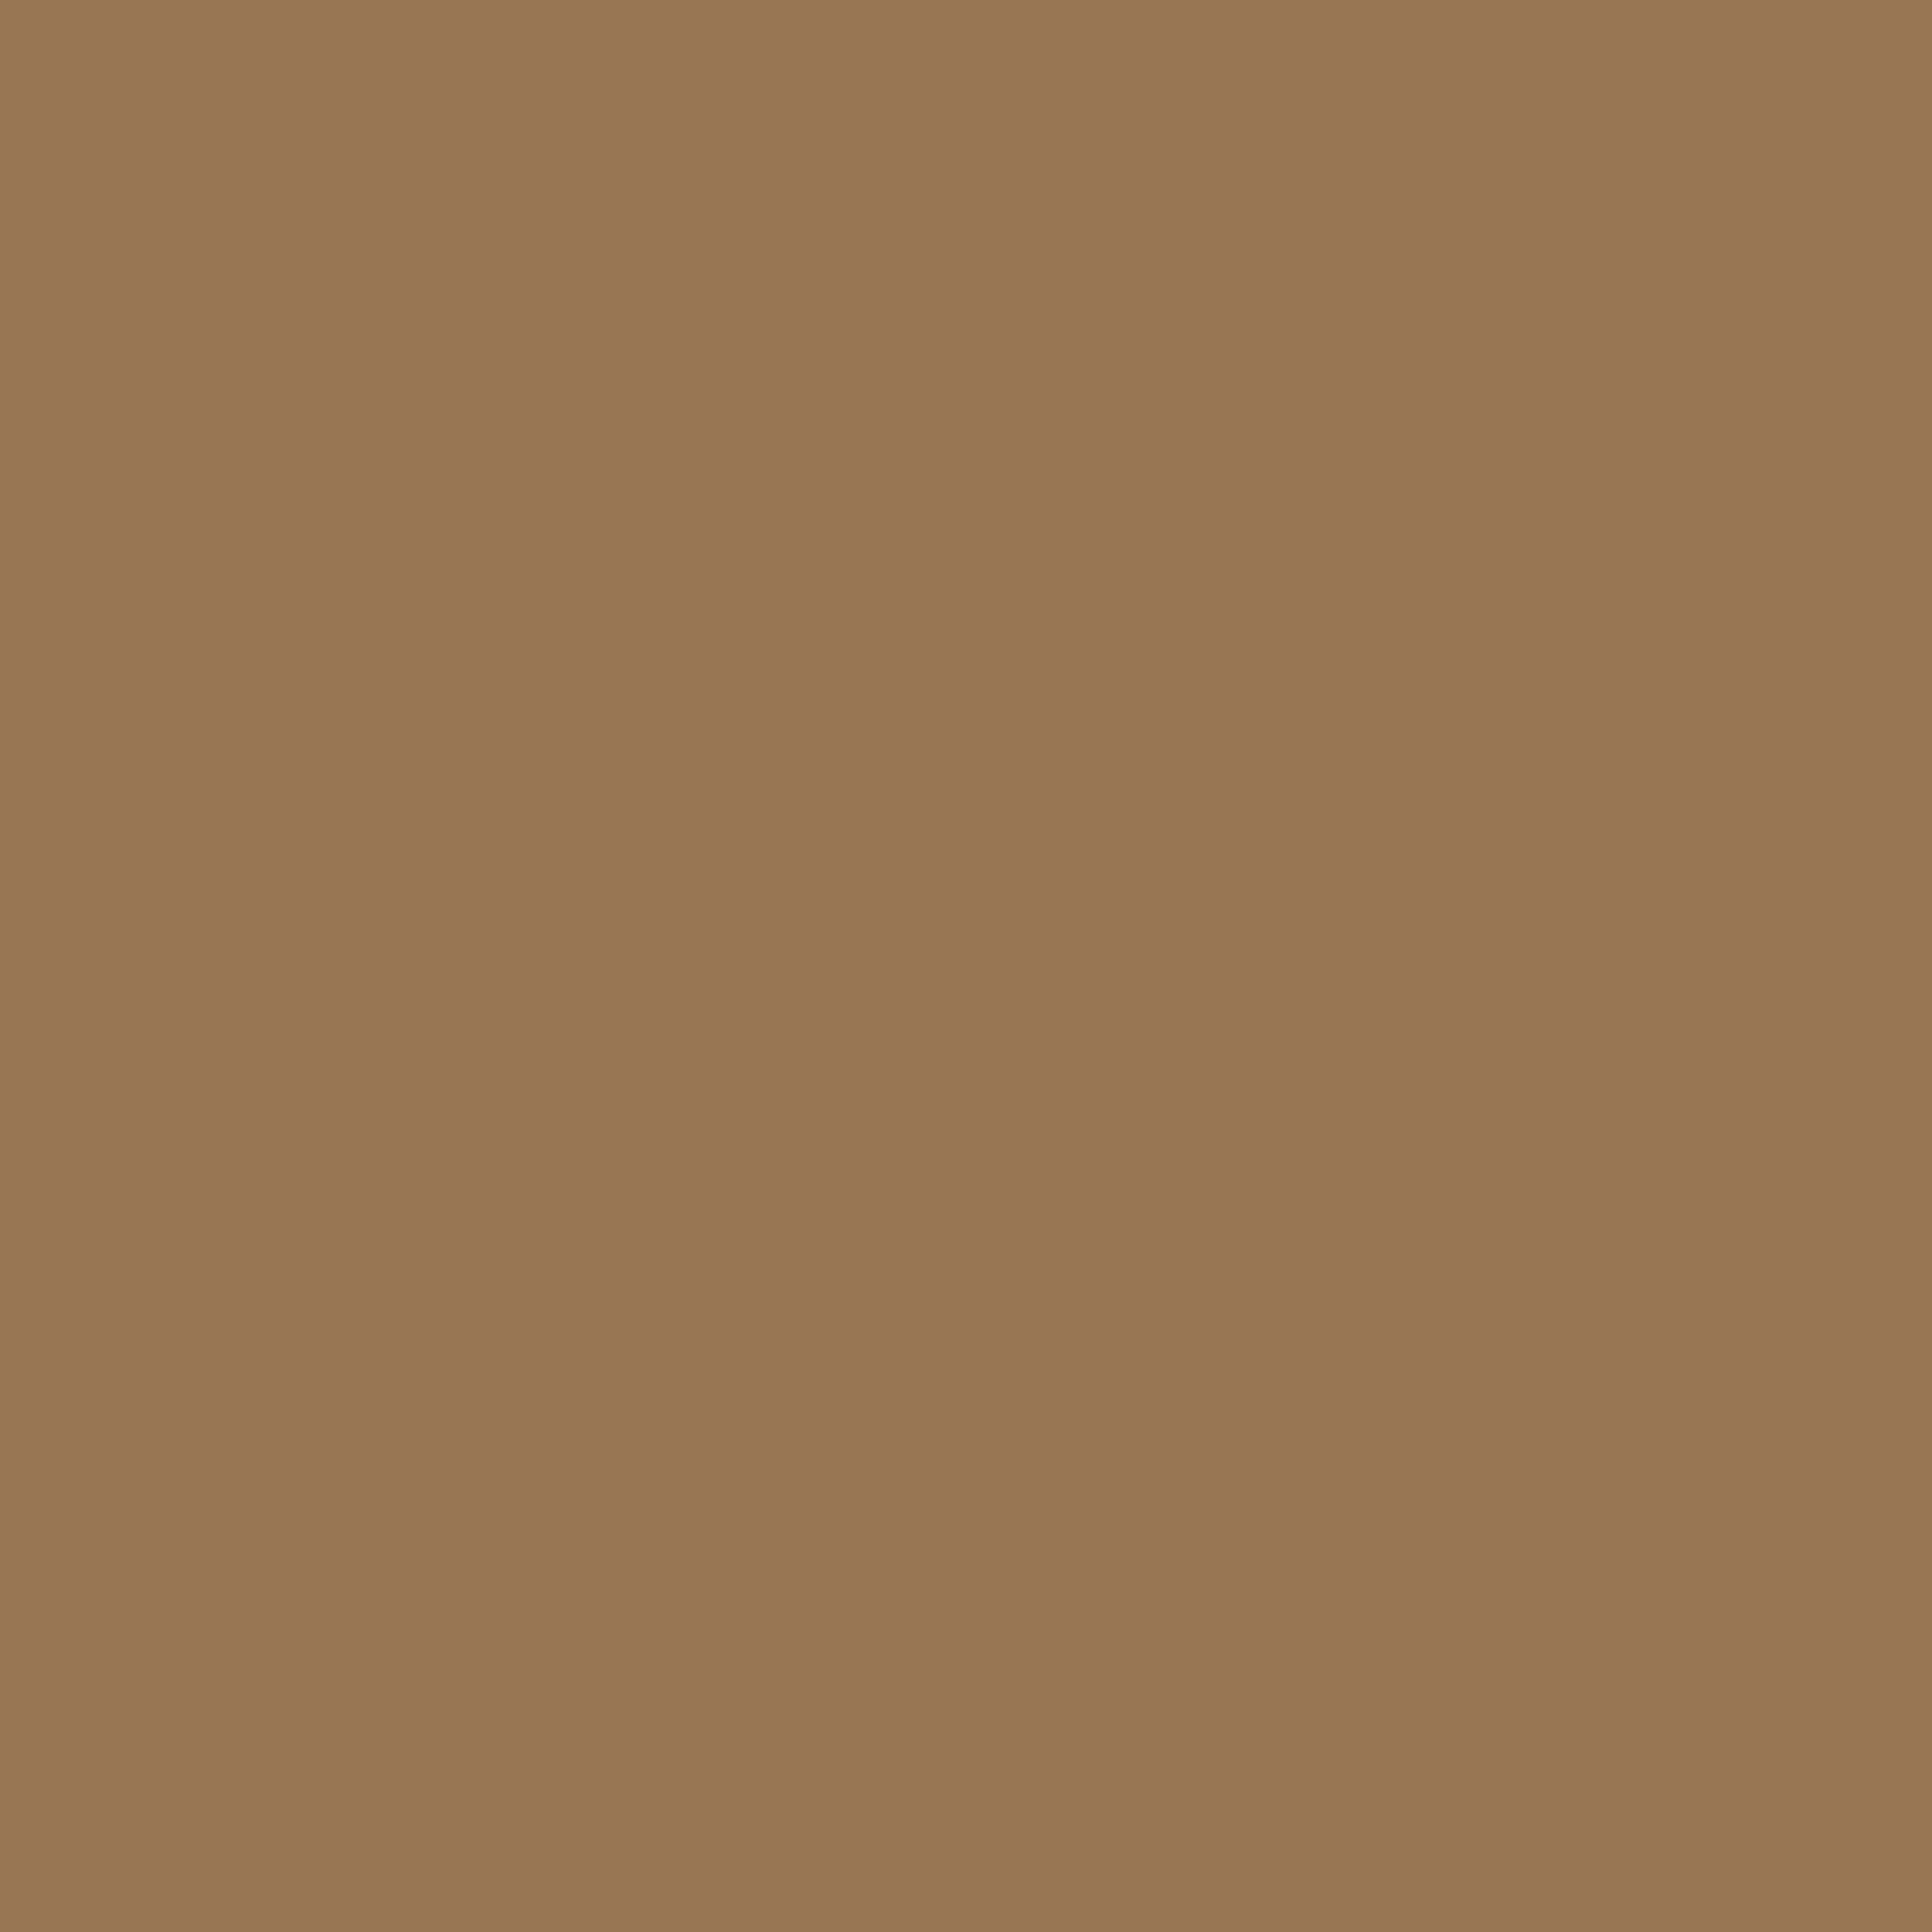 3600x3600 Pale Brown Solid Color Background